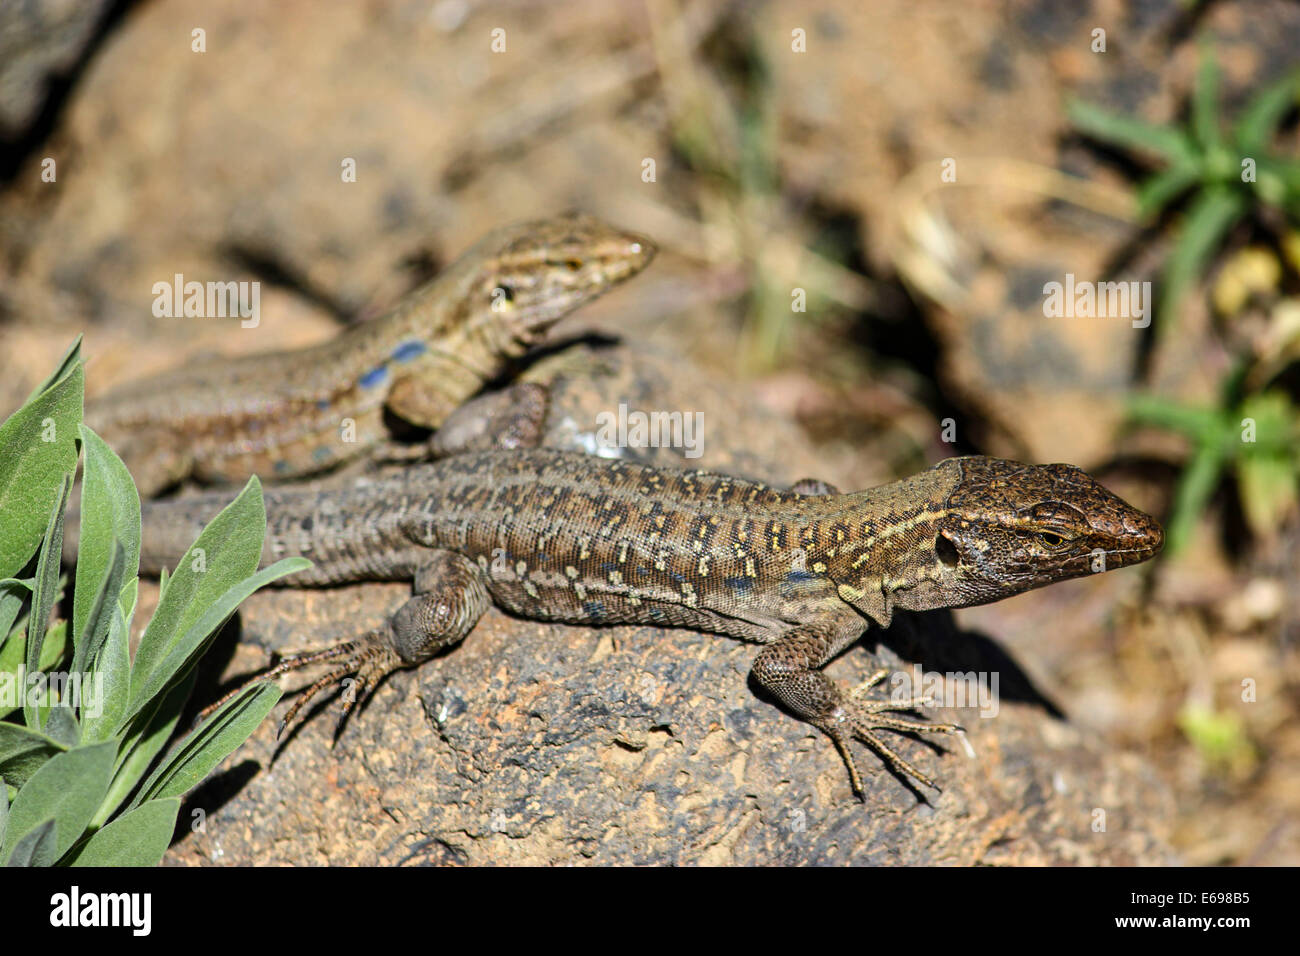 Two Tenerife Lizards or Western Canaries Lizards (Gallotia galloti) basking on a rock, Tenerife, Canary Islands, Spain Stock Photo